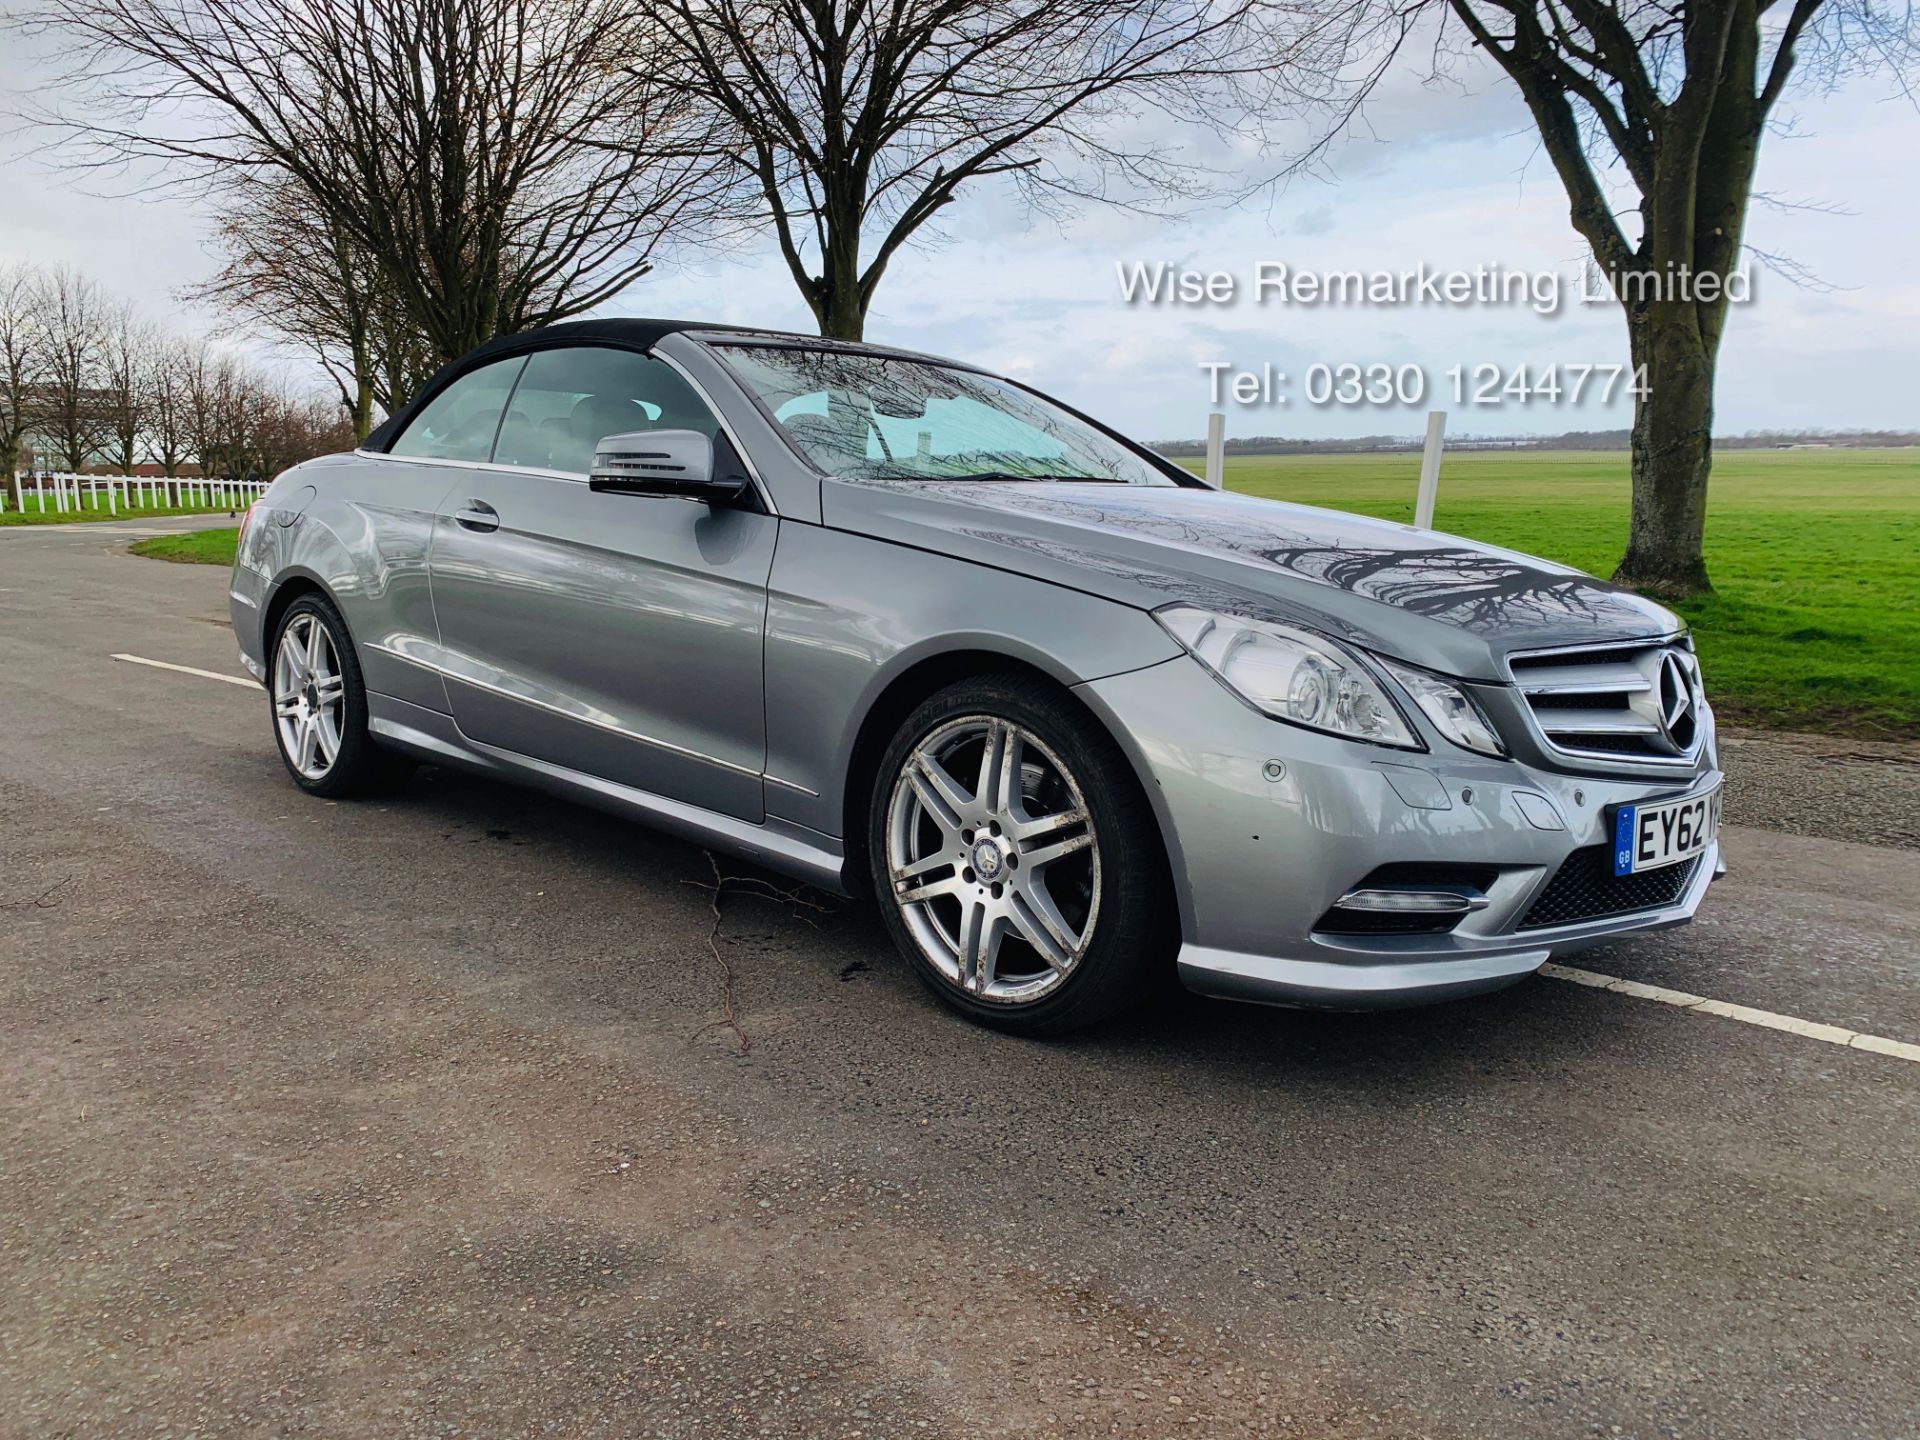 Mercedes E250 CDI Convertible Sport Tip Auto - 2013 Model - Service History - Leather - Parking aid - Image 8 of 27